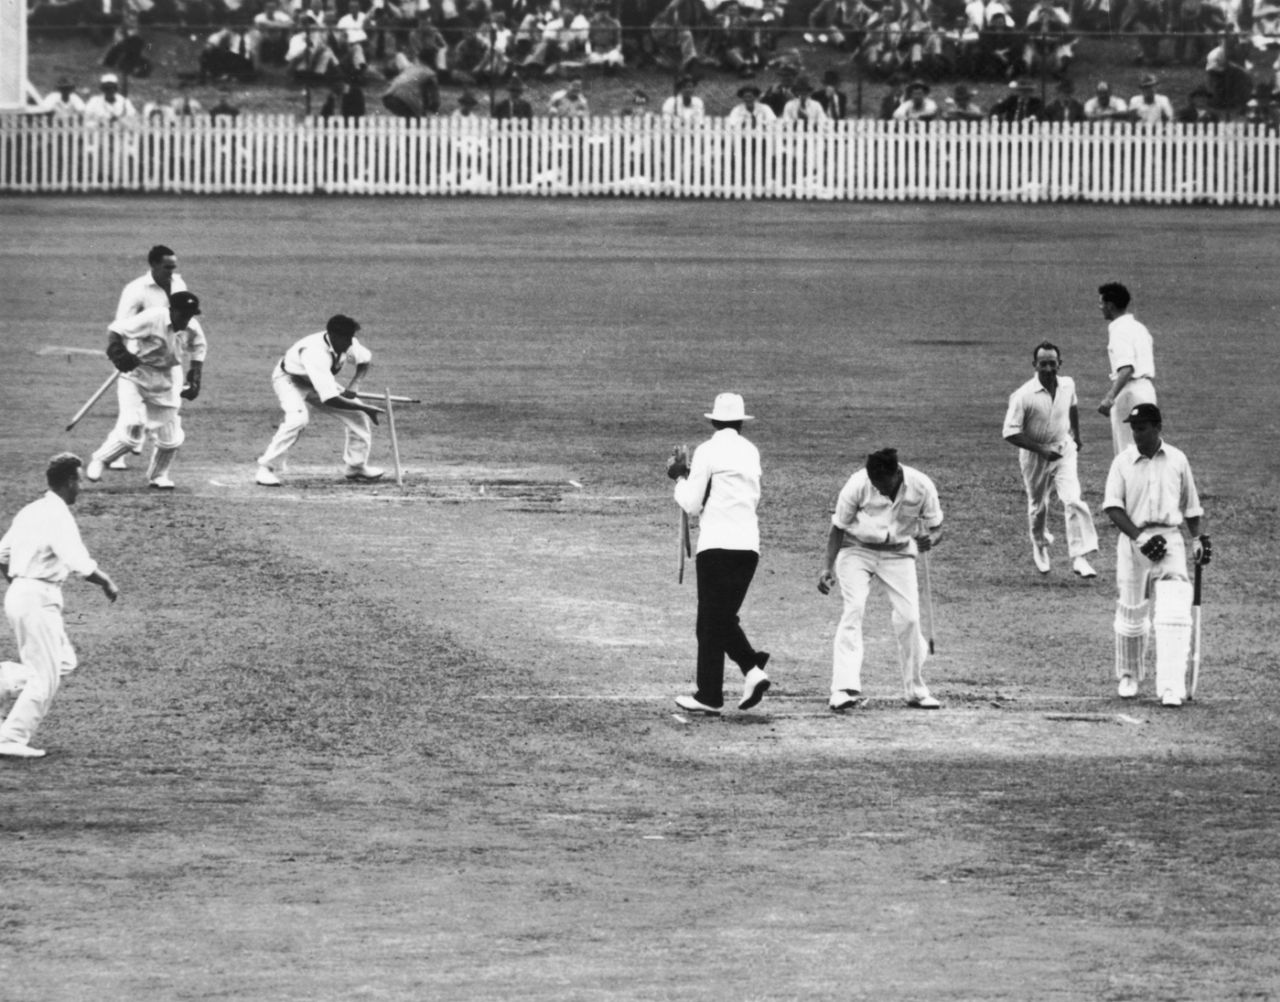 Australian players grab the stumps as souvenirs after beating England by 70 runs, Australia v England, 1st Test, Brisbane, 4th day December 5, 1950